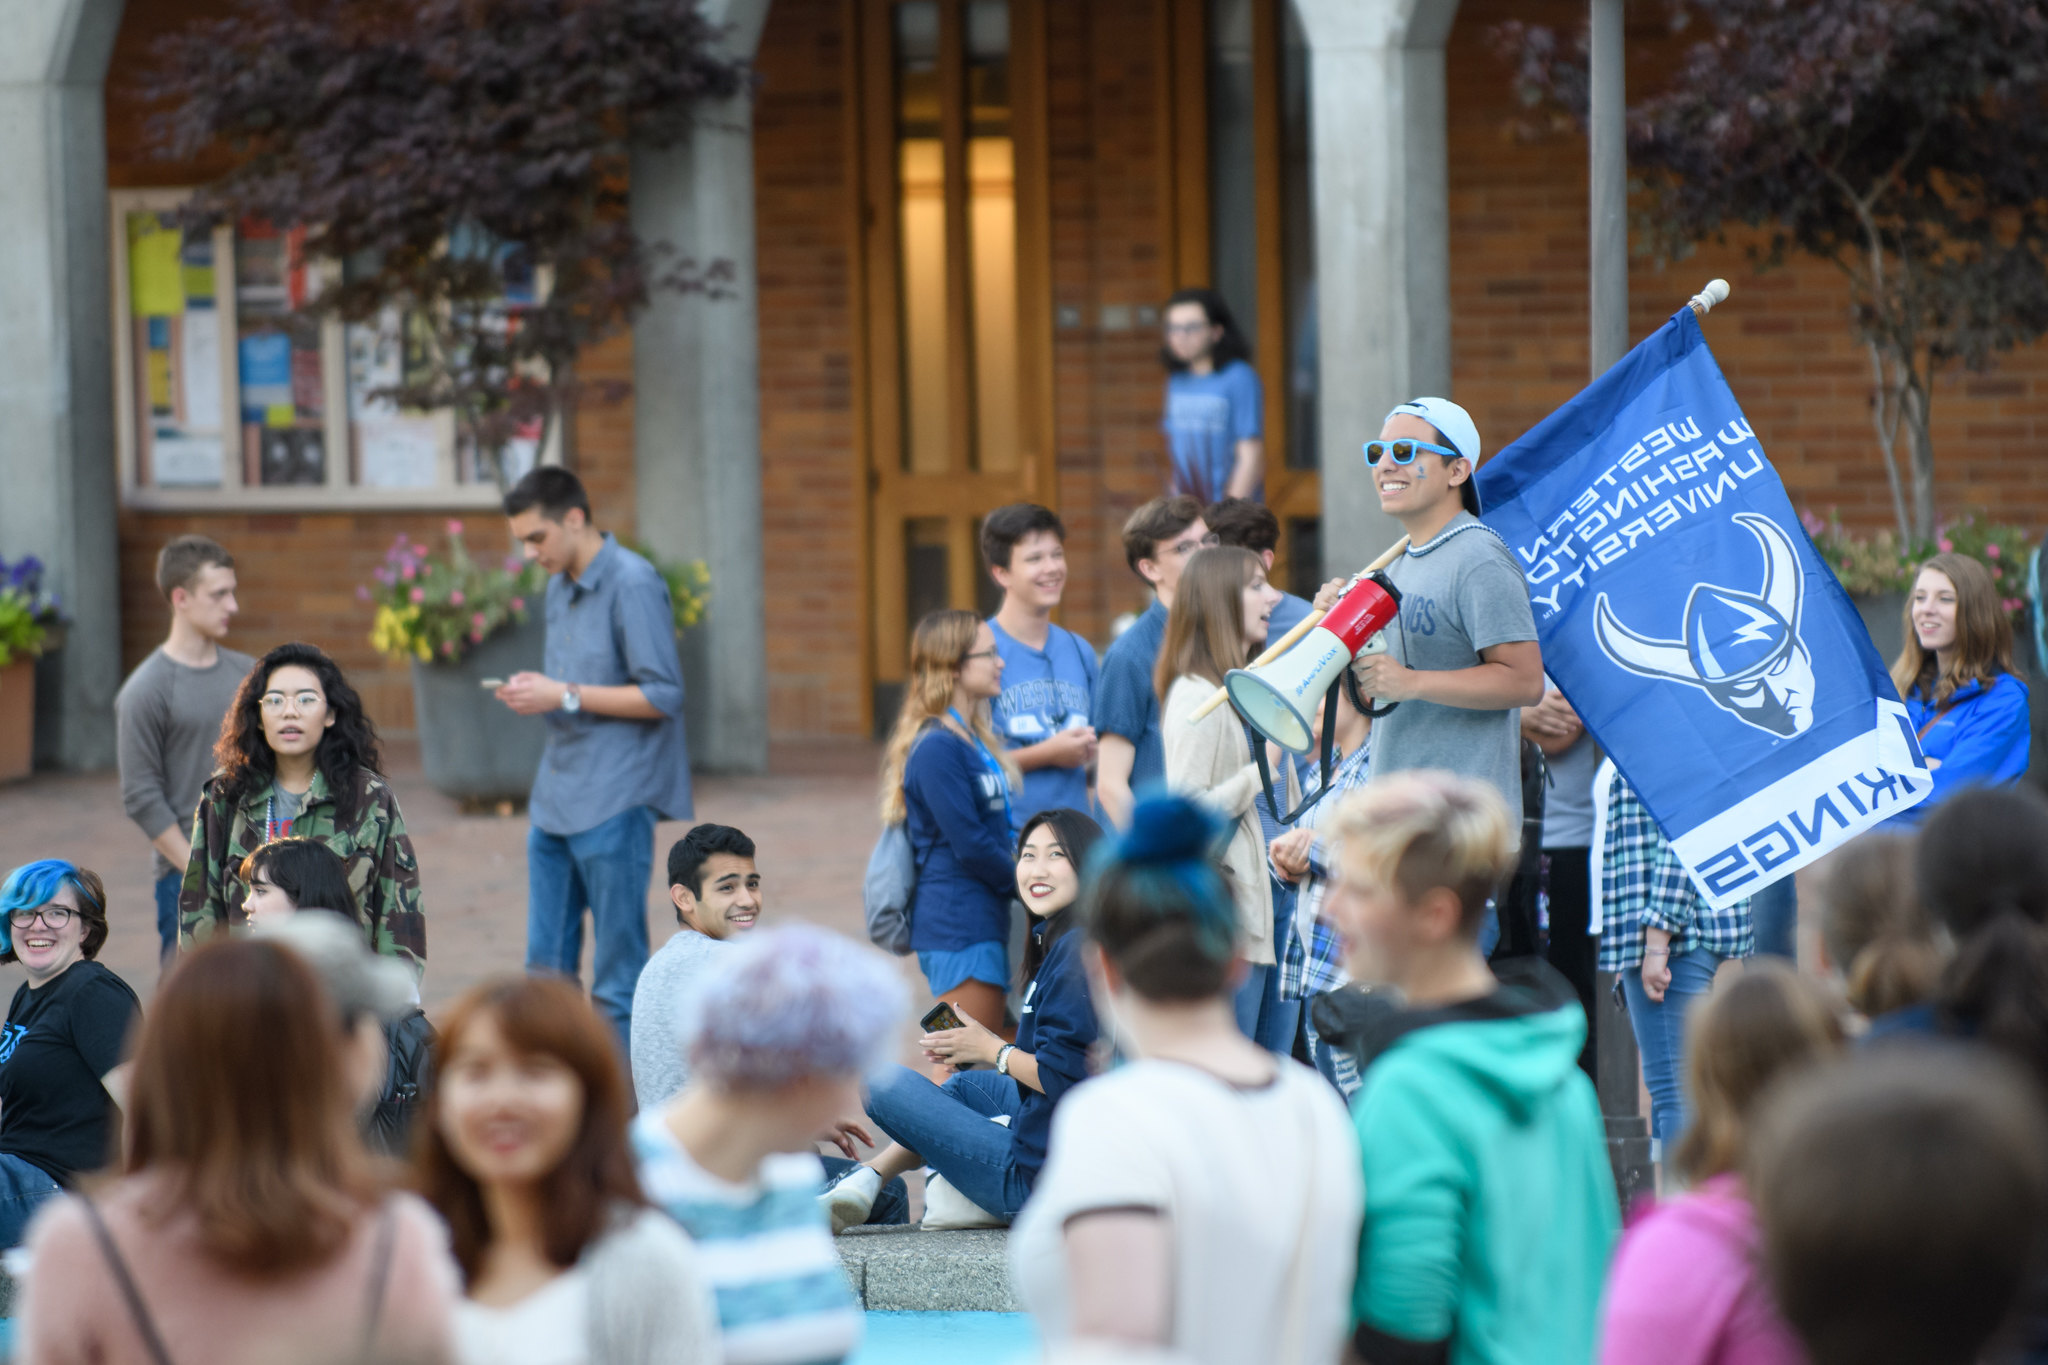 A student holding a megaphone and a WWU Athletics flag with a Viking logo